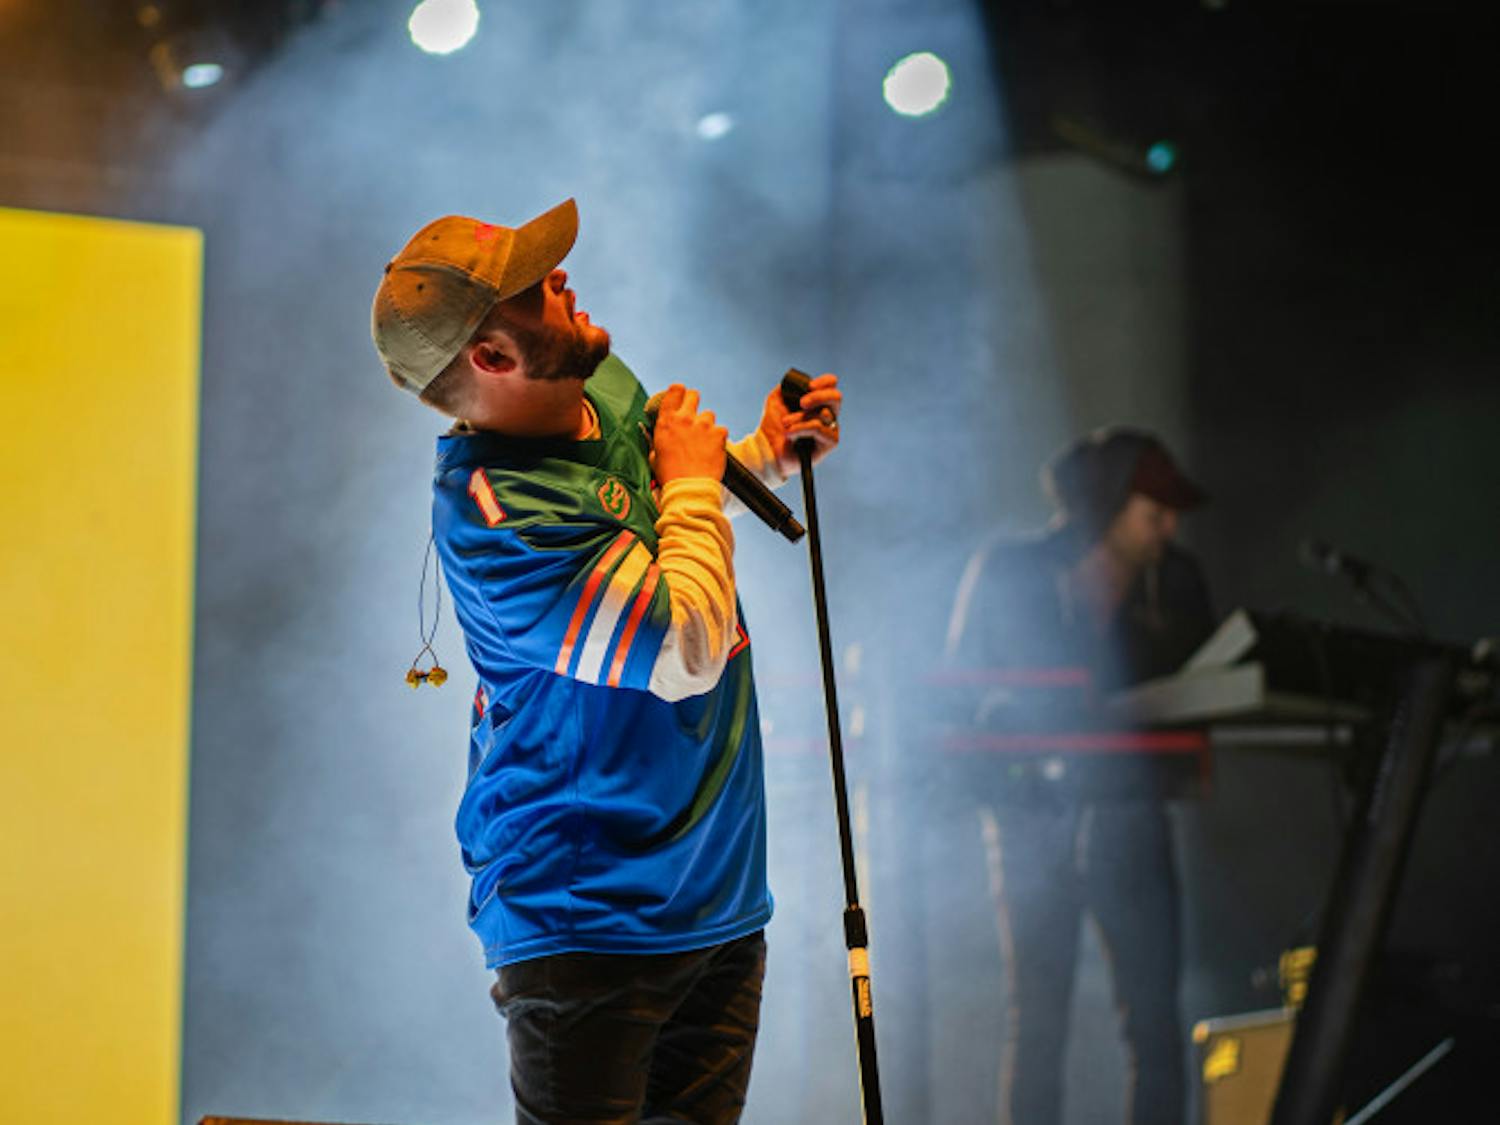 Quinn XCII shows off his UF jersey Friday night during the Fall concert at Flavet Field.